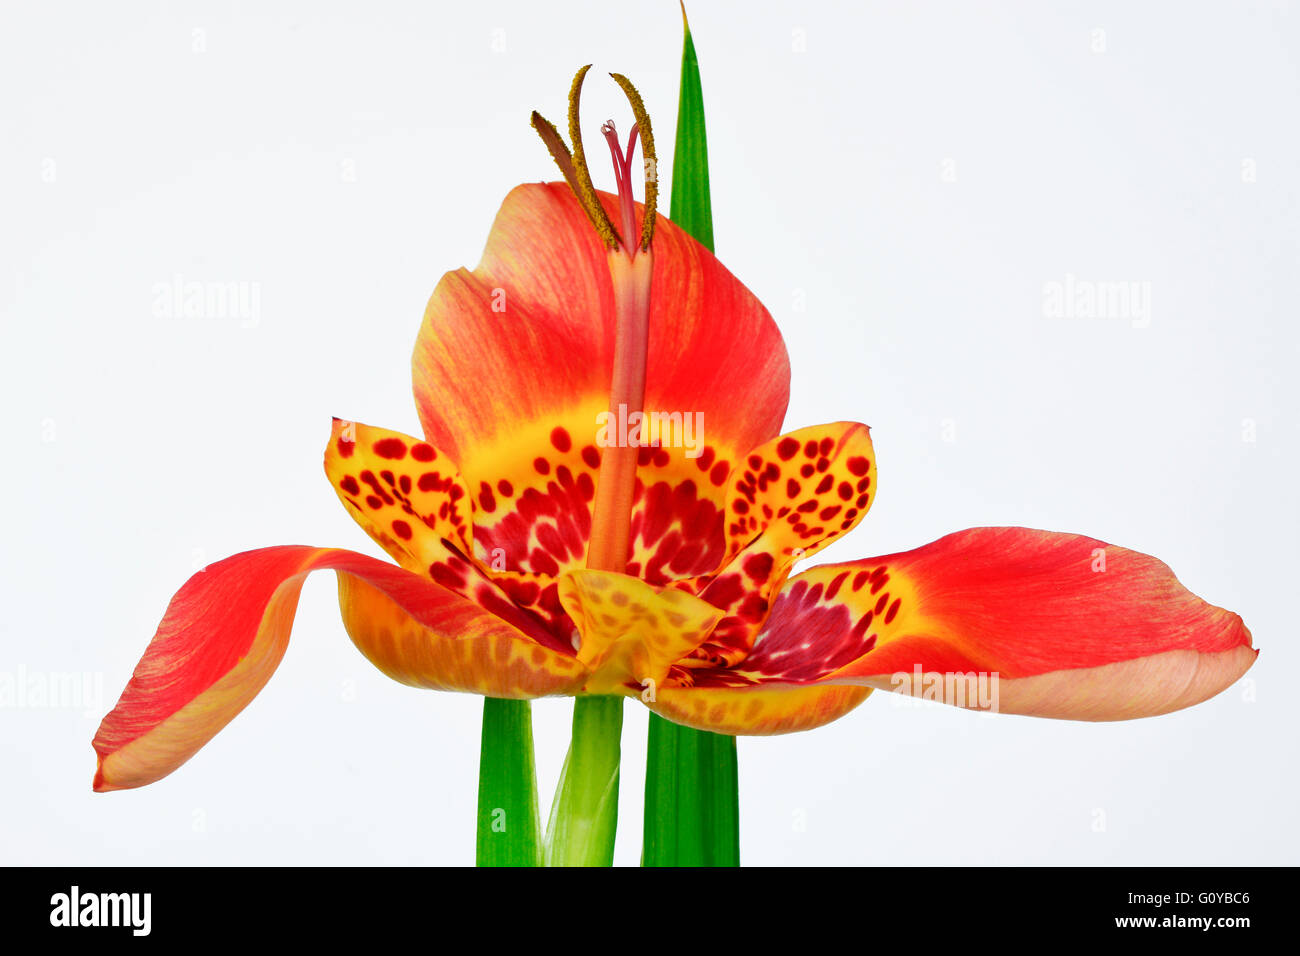 Mexican Shell flower, Tigridia, Tigridia pavonia, Beauty in Nature, Bulb, Central America Indigenous, Colour, Contemporary, Creative, Cut Out, Flower, Spring Flowering, Summer Flowering, Frost hardy, Jockey's cap lily, Mexican Shellflower, Peacock flower, Perennial, Plant, Stamen, Studio Shot, Tiger flower, Orange, White, Stock Photo